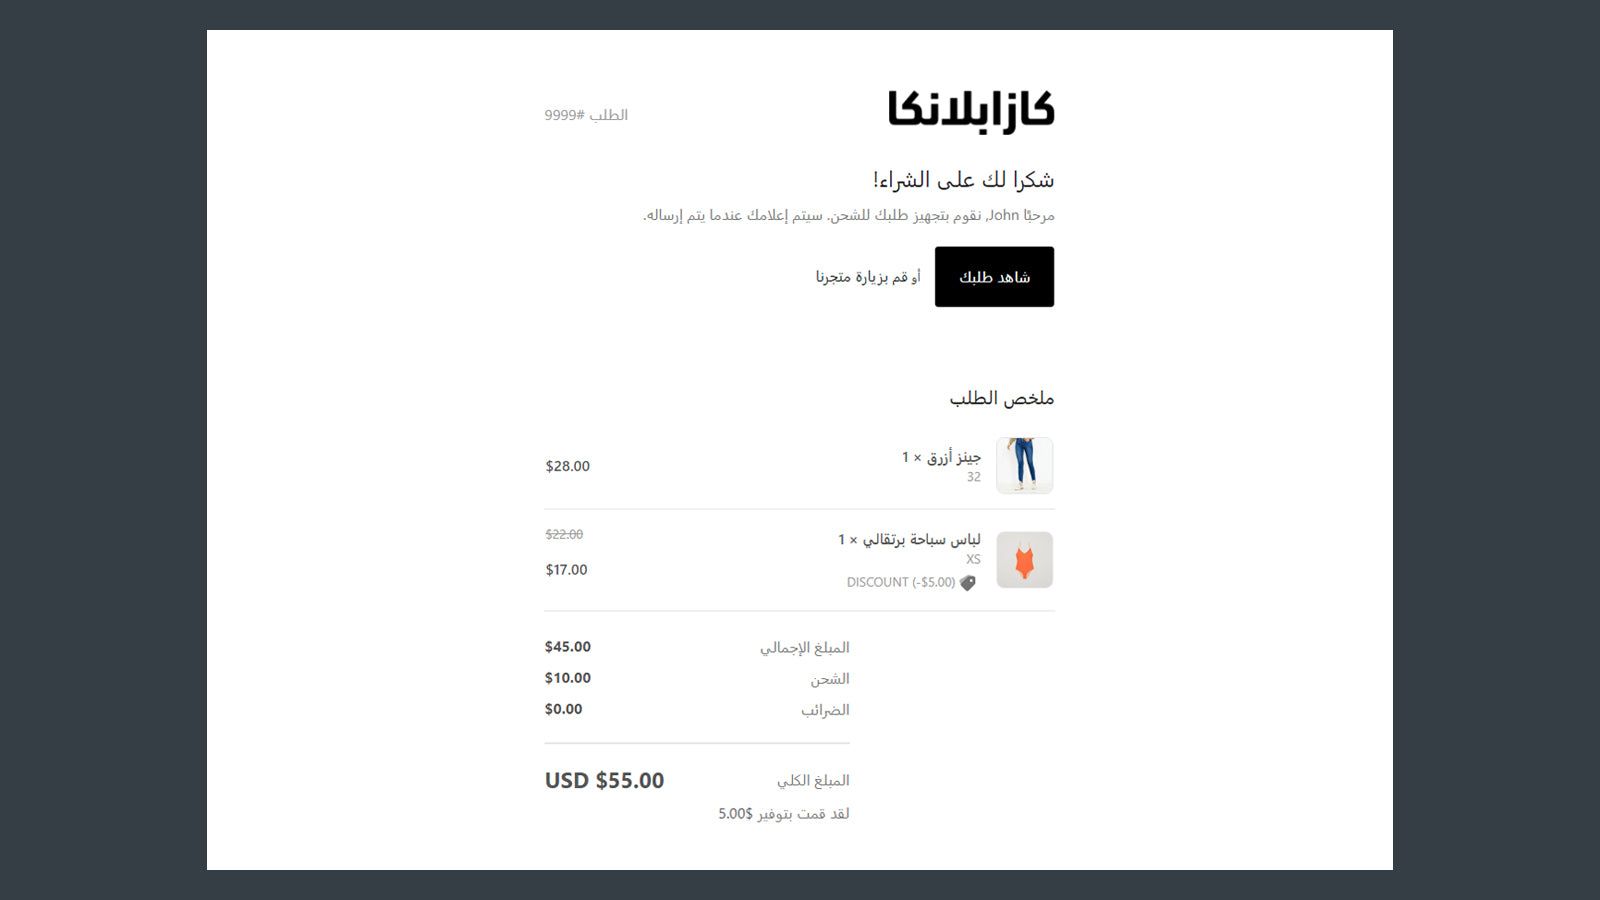 Arabic Email Example